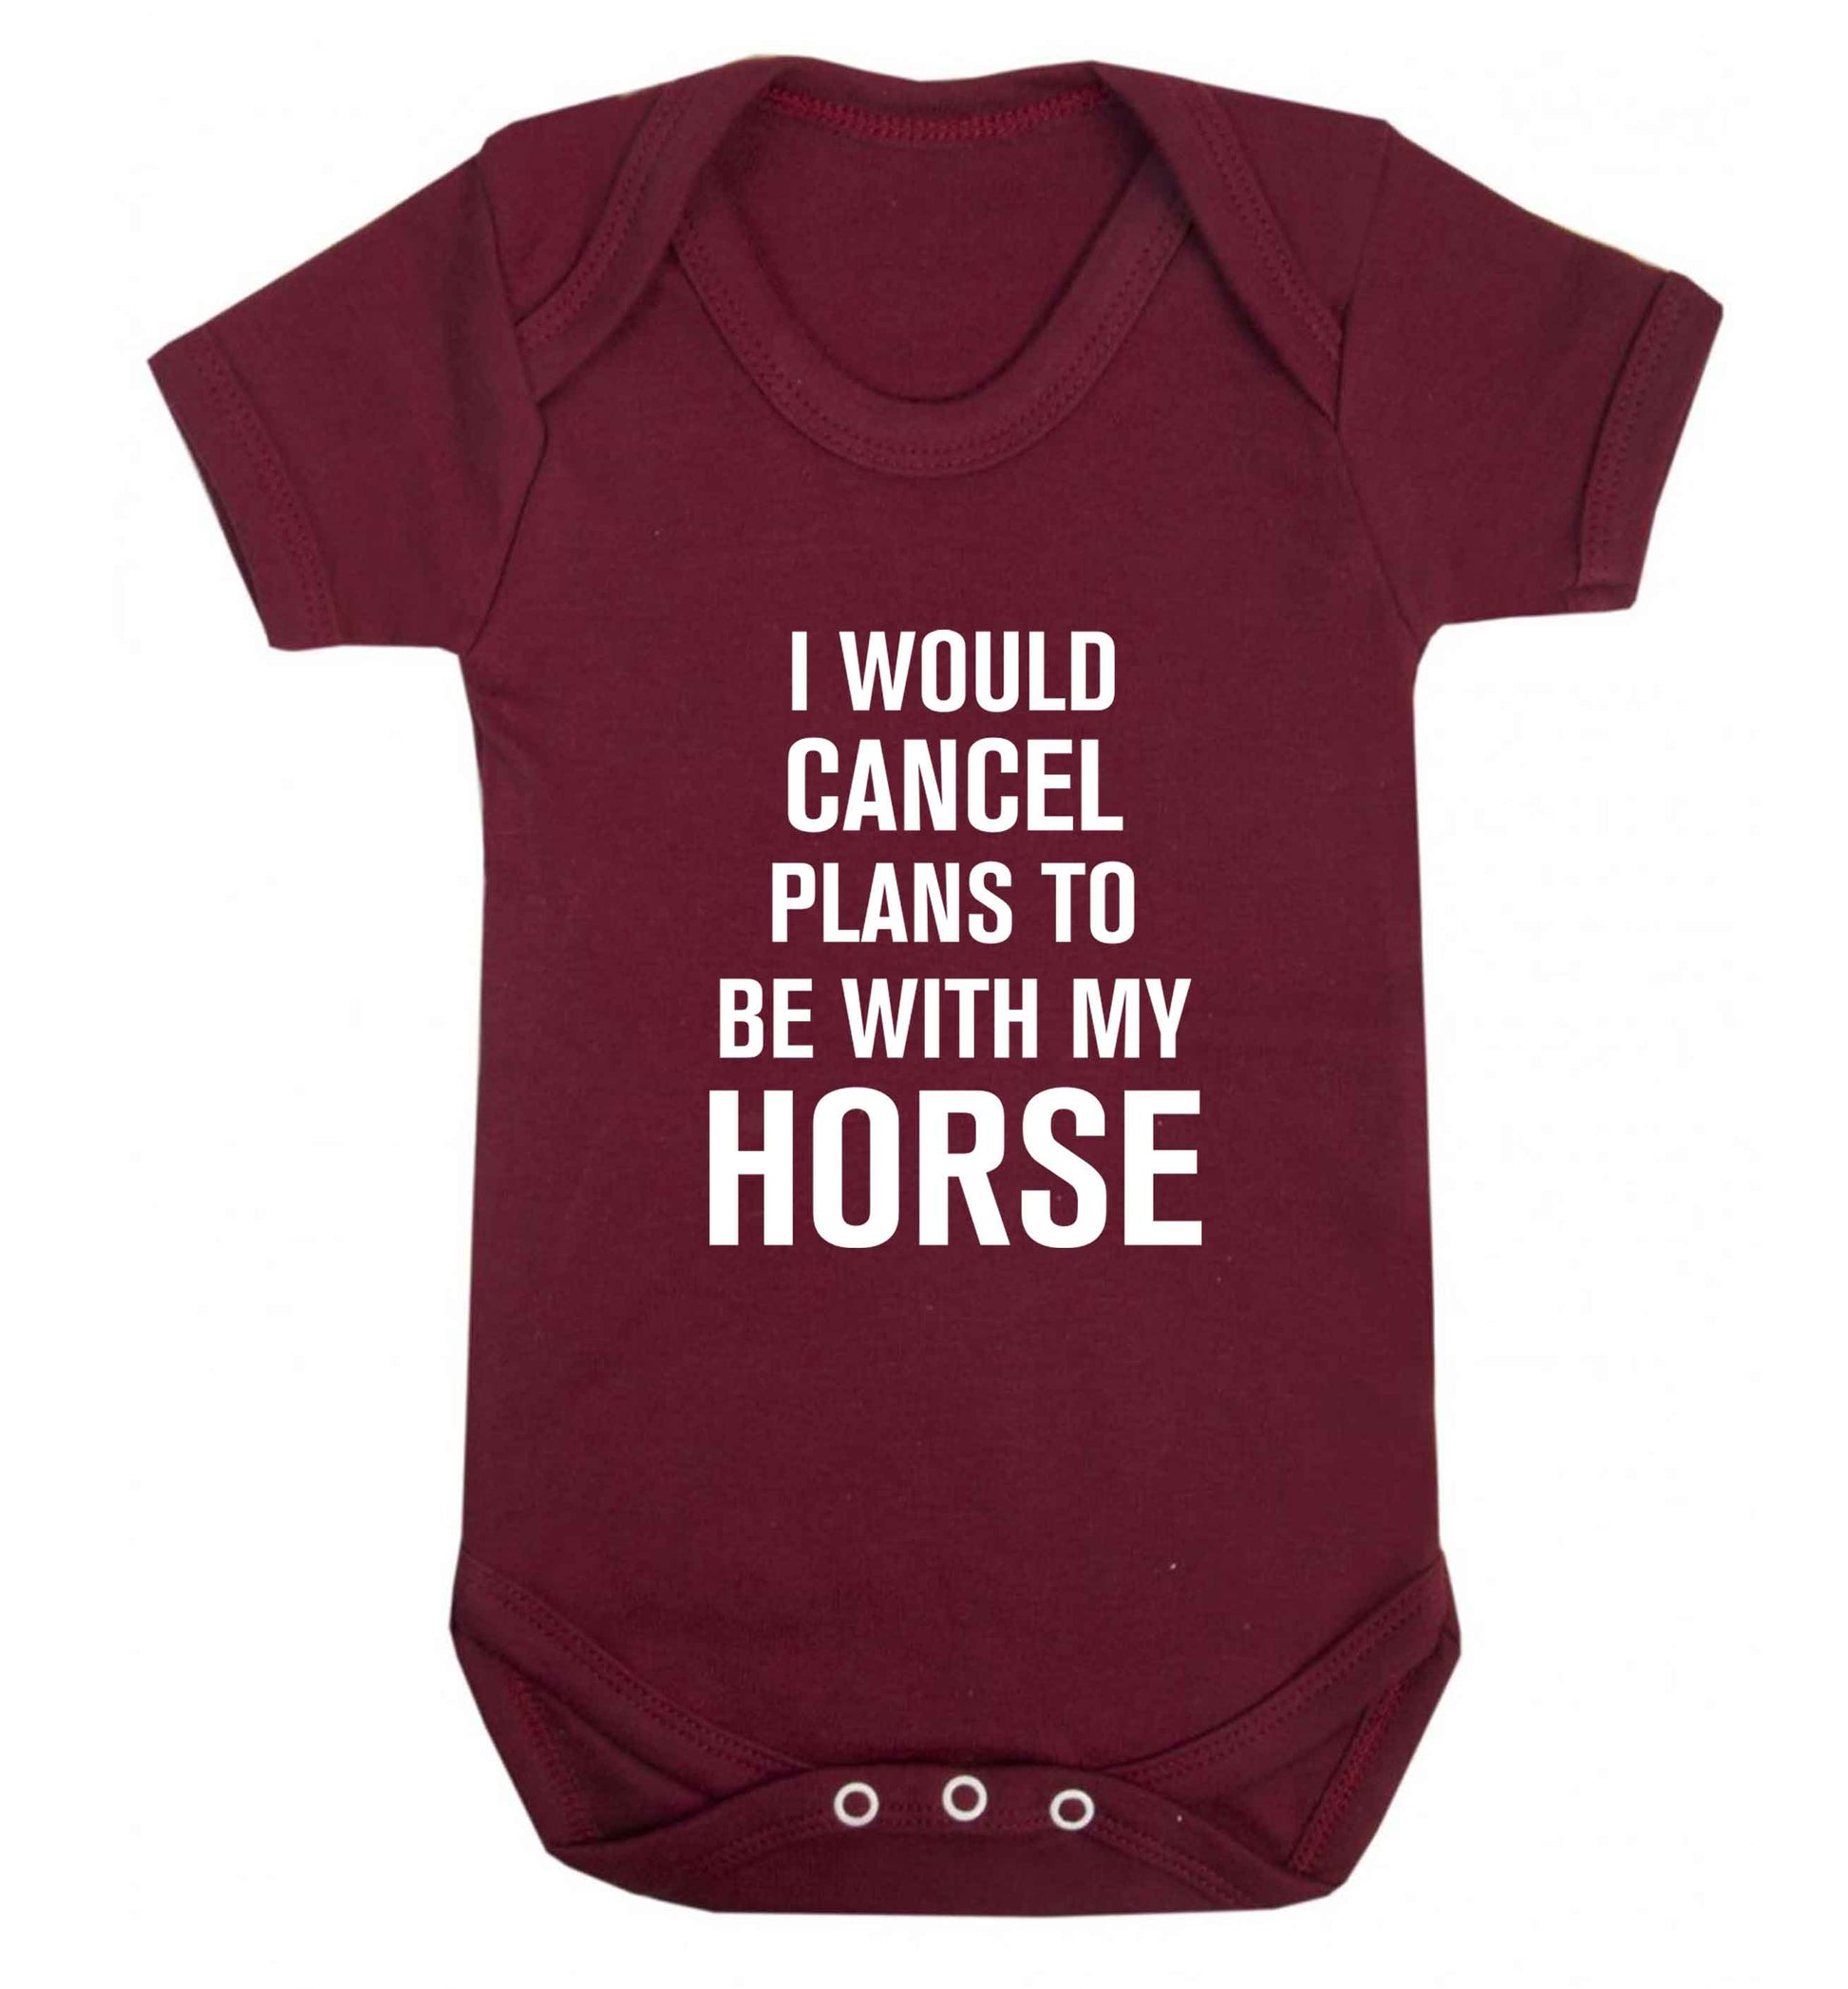 I will cancel plans to be with my horse baby vest maroon 18-24 months